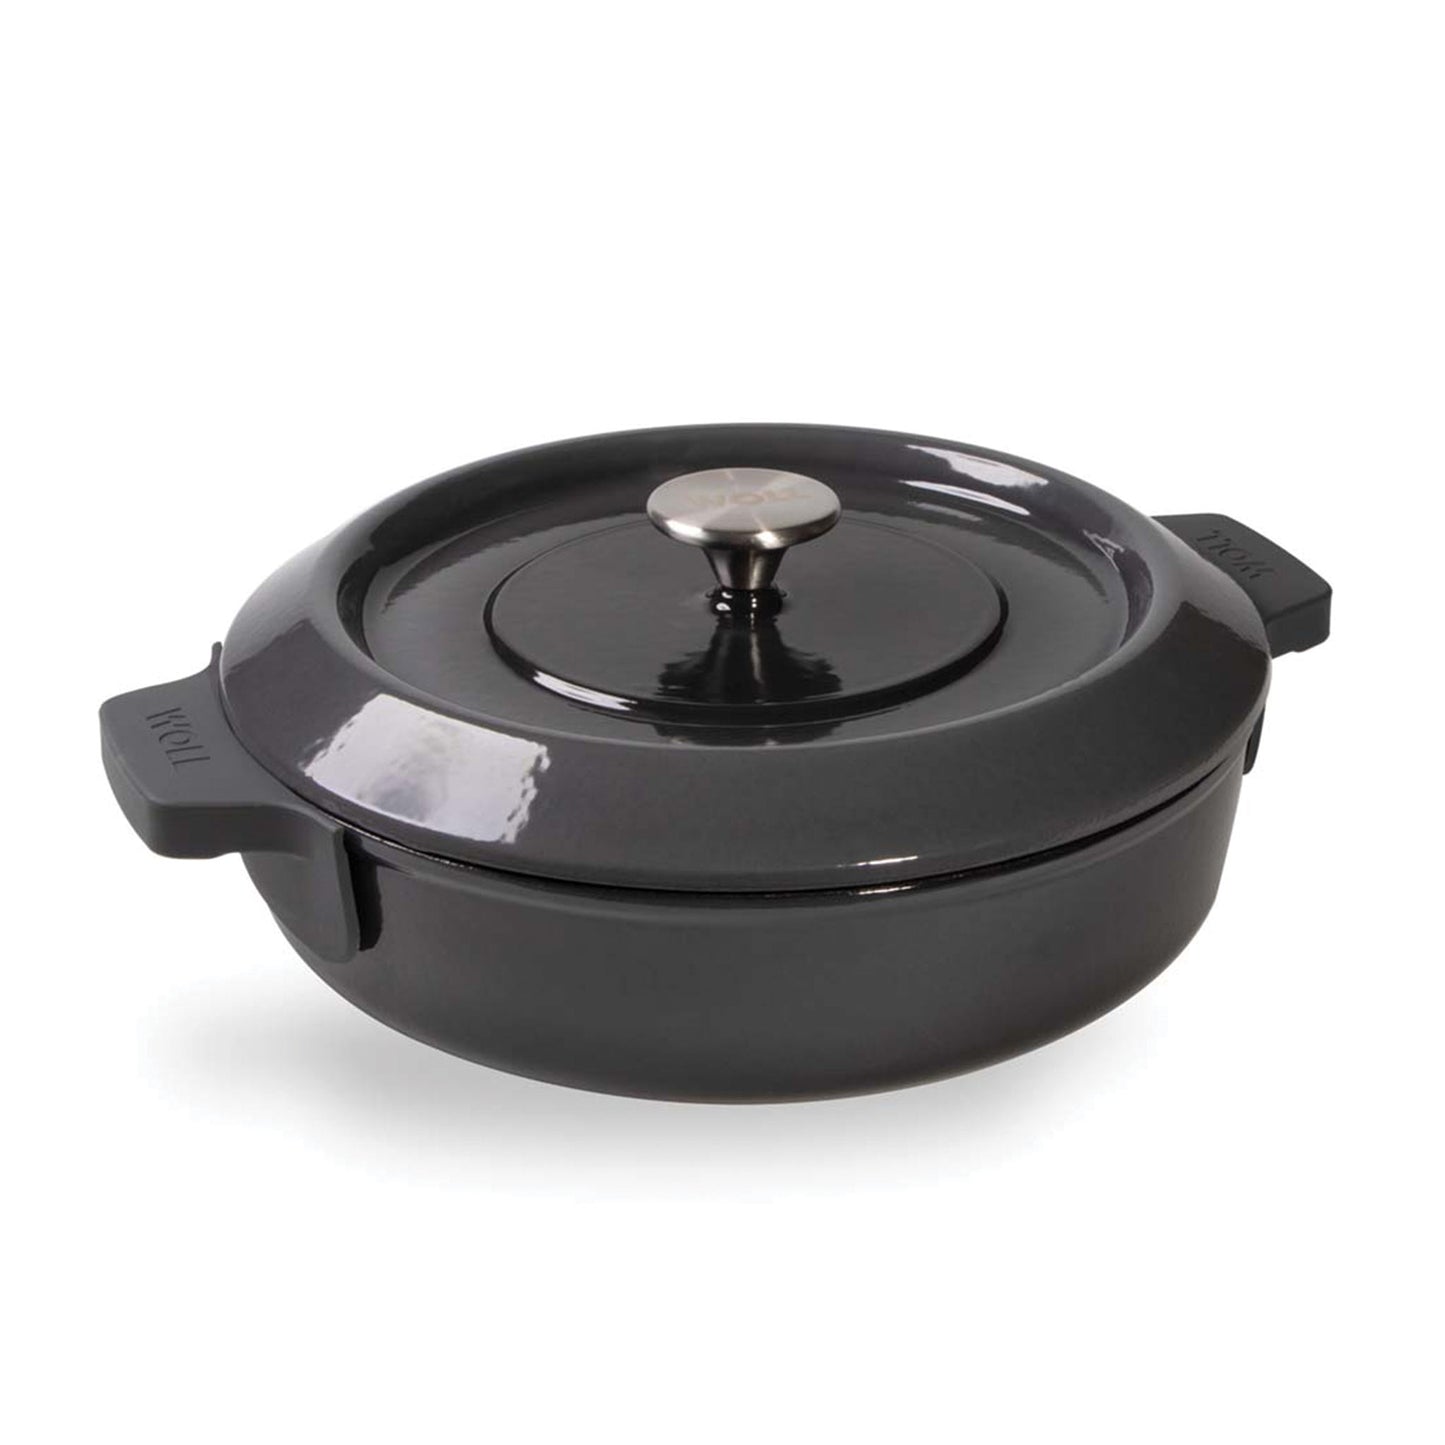 WOLL Cast Iron Covered Casserole